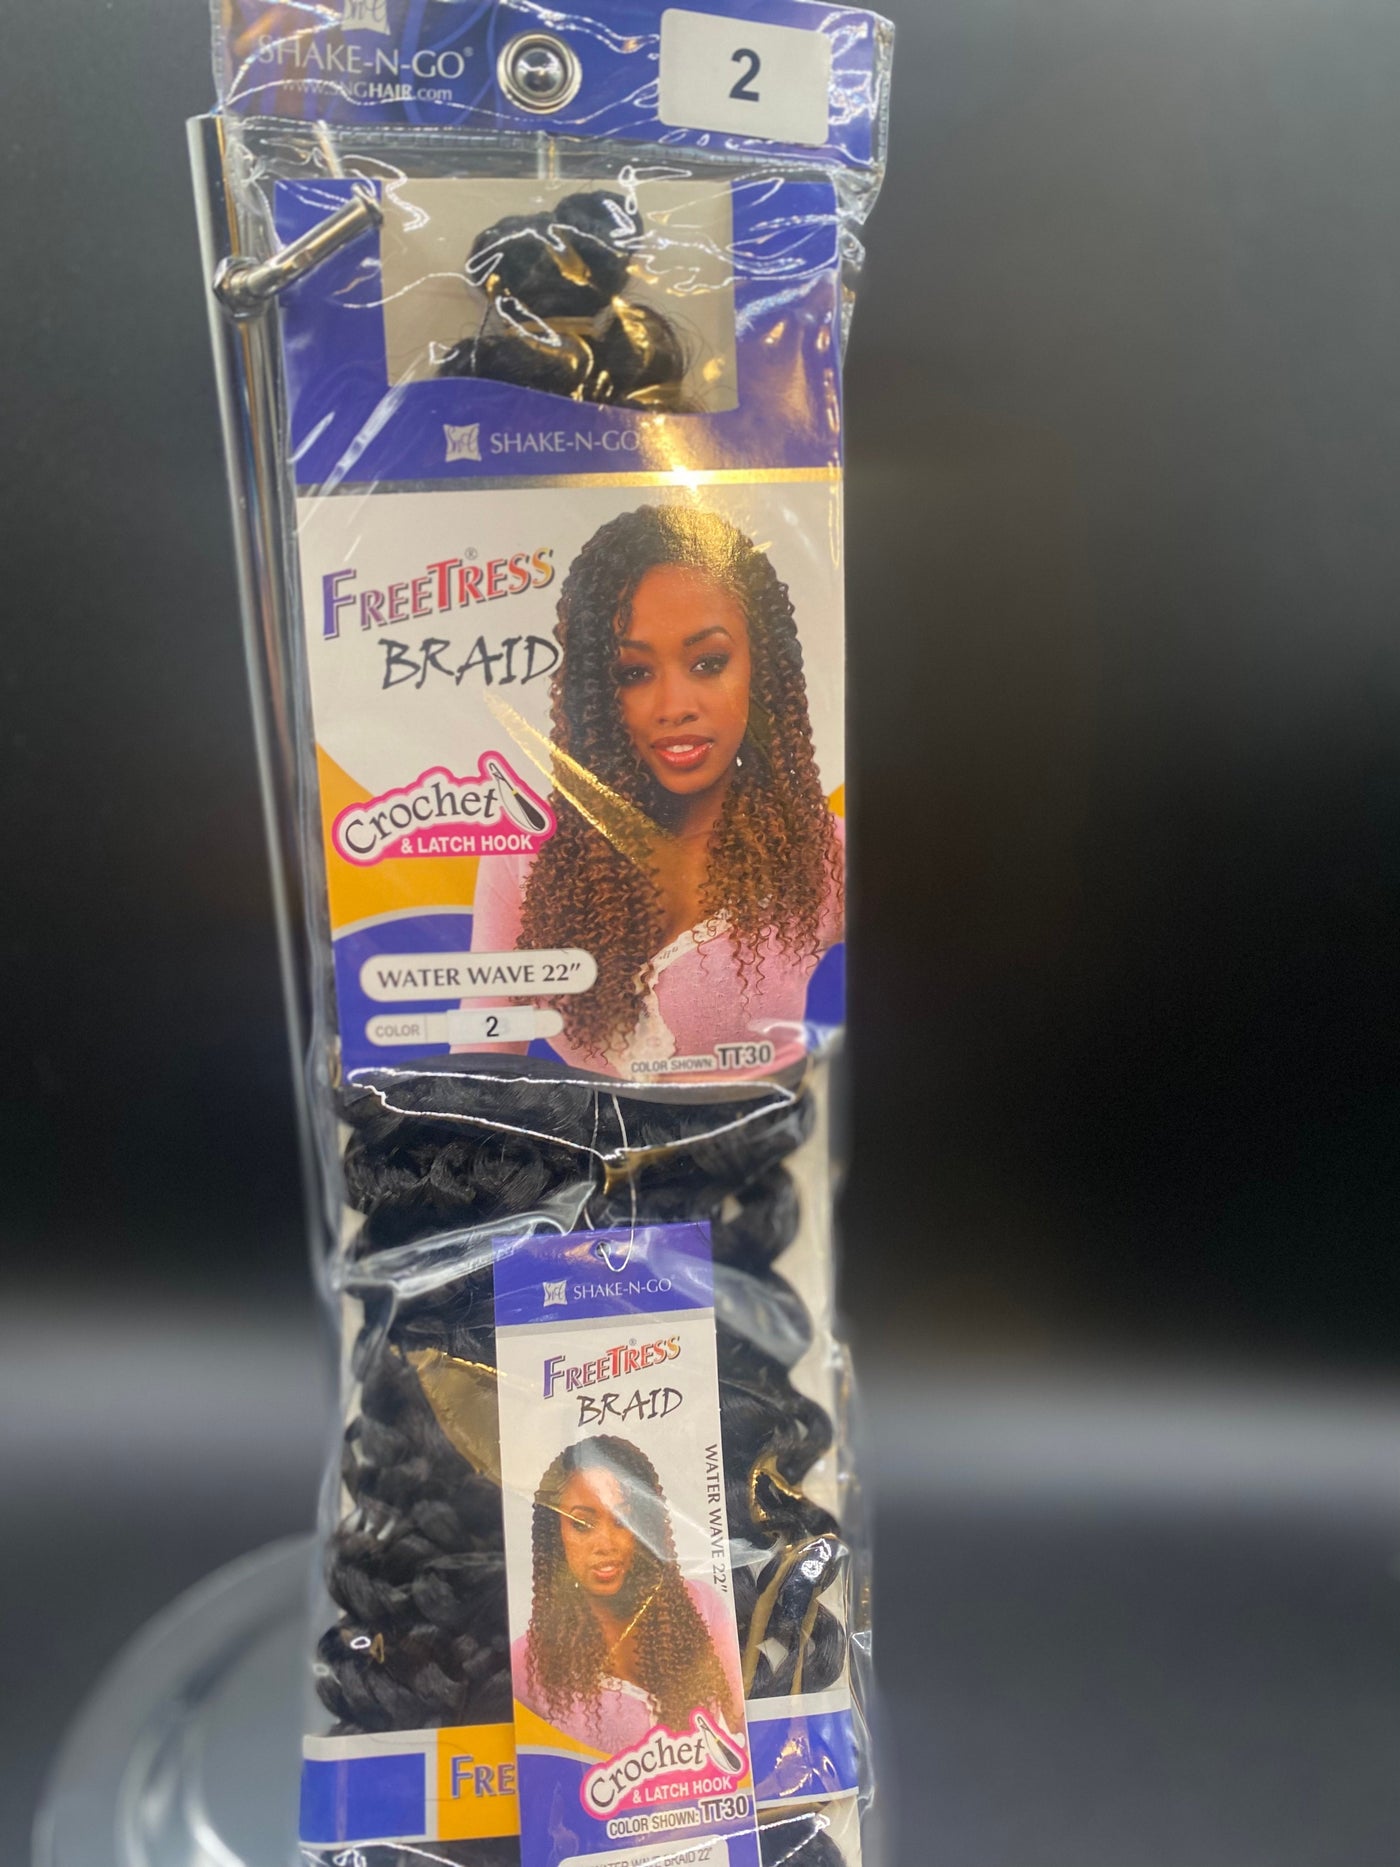 Freetress Synthetic Braiding Hair WATER WAVE BRAID 22"   Weight: 100g Style: Crochet Braiding hair Length: 22inch FREETRESS crochet hair Suitable Dying Colors: None Hair Weft: Machine Double Weft Chemical Processing: Dyed Hair Length: 22inch Hairstyle advantage: Hot style color 2